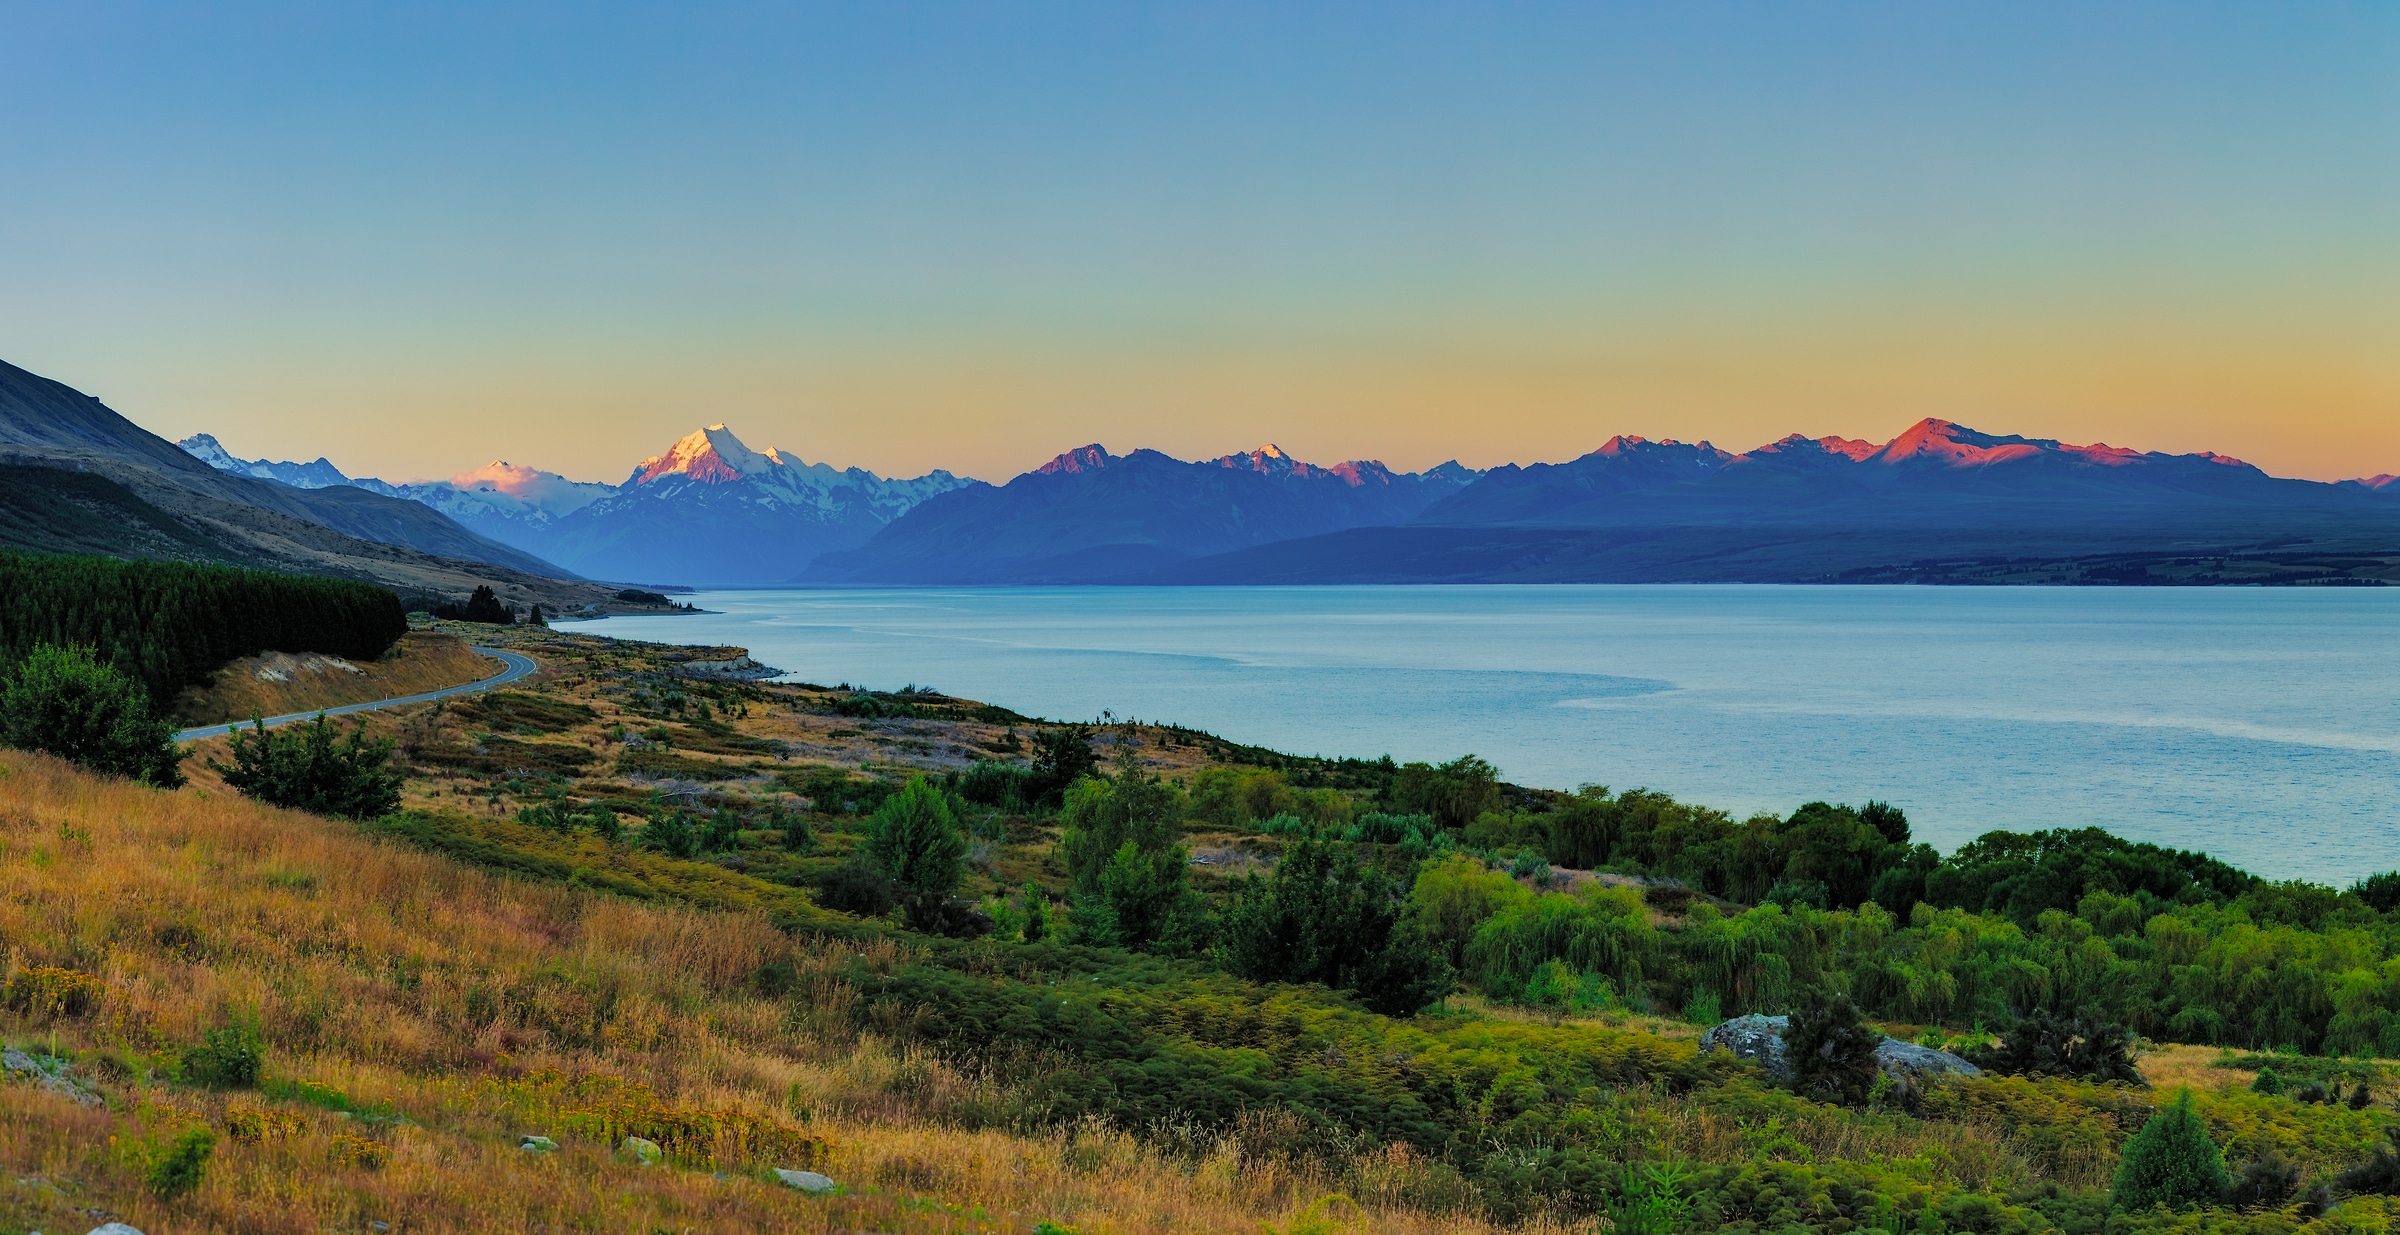 197 megapixels! A very high resolution, large-format VAST photo print of sunset over Lake Pukaki with mountains in the background; landscape photograph created by John Freeman in Mount Cook Road, Ben Ohau 7999, New Zealand.